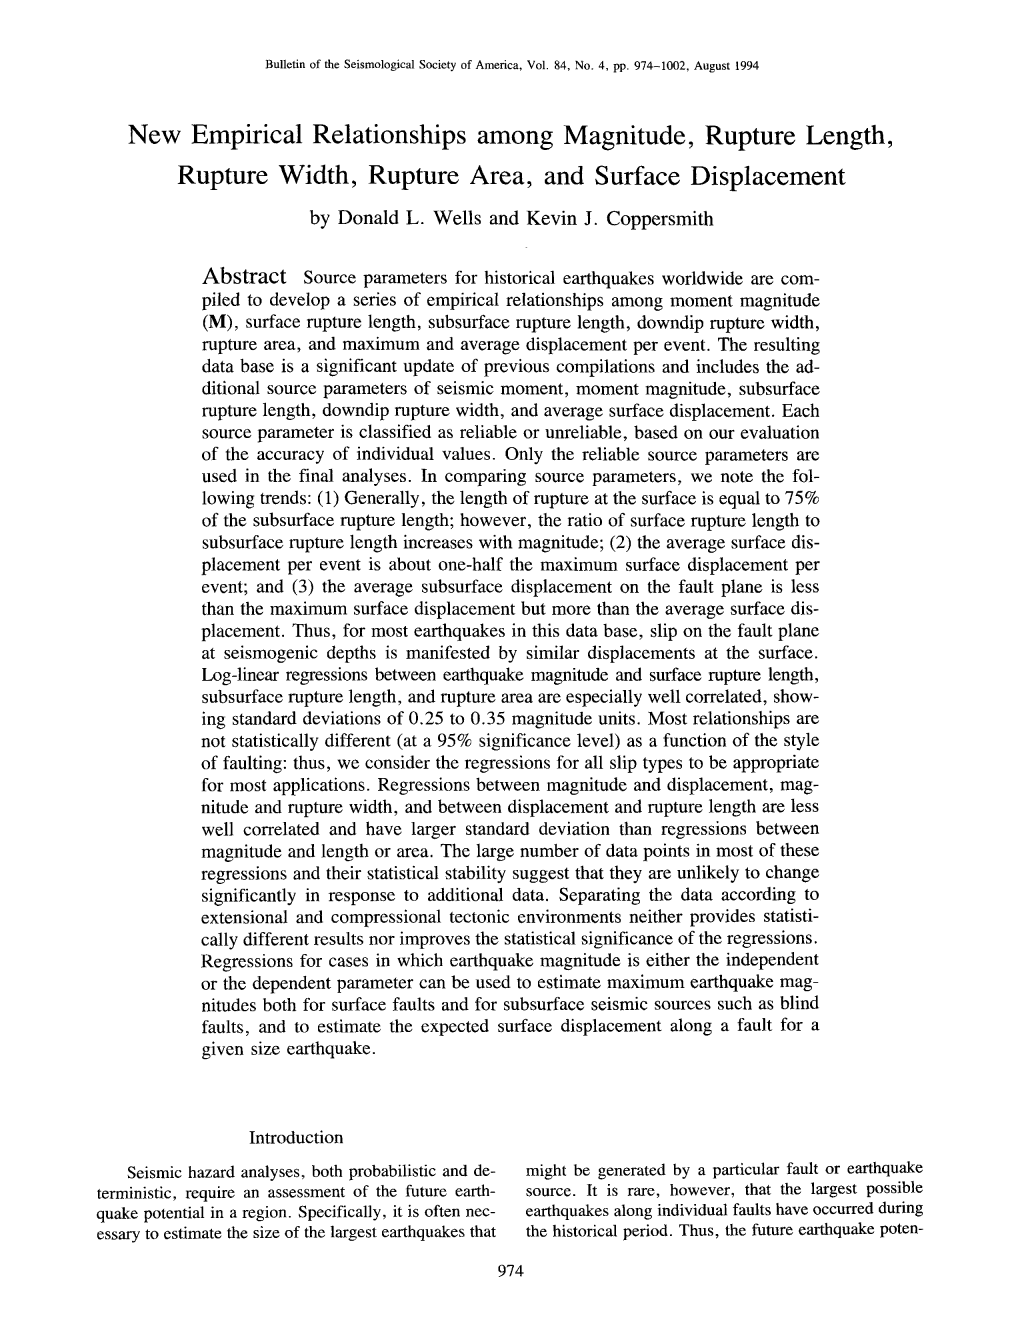 New Empirical Relationships Among Magnitude, Rupture Length, Rupture Width, Rupture Area, and Surface Displacement